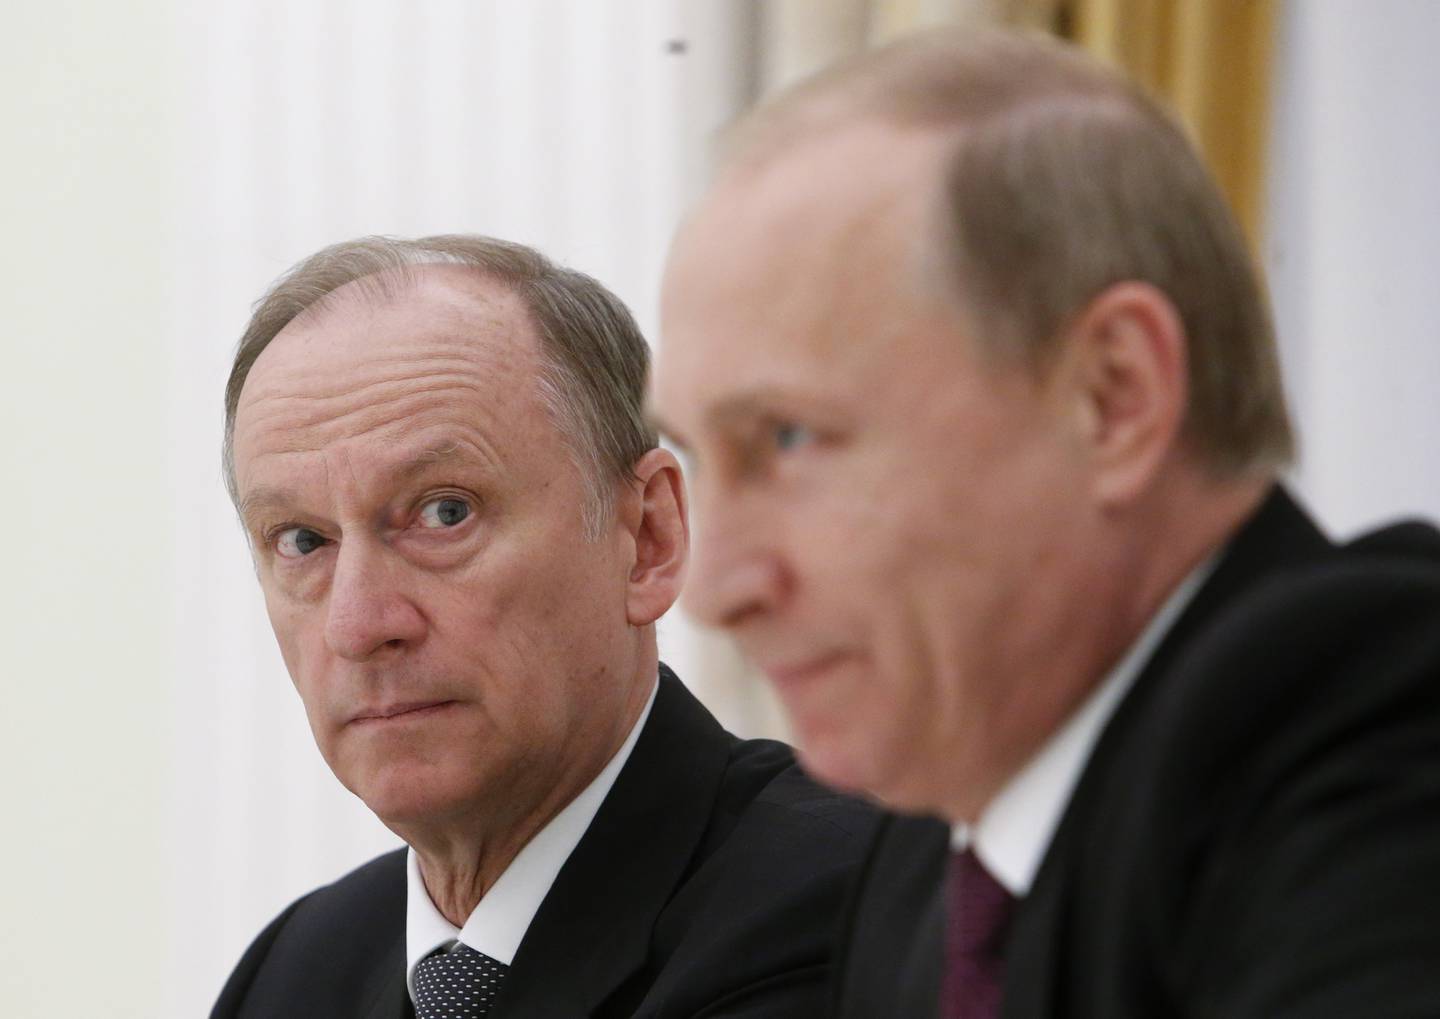 Nikolai Patrushev, Secretary General of Russia's National Security Council, is pictured with President Vladimir Putin (right) during a meeting in the Kremlin.